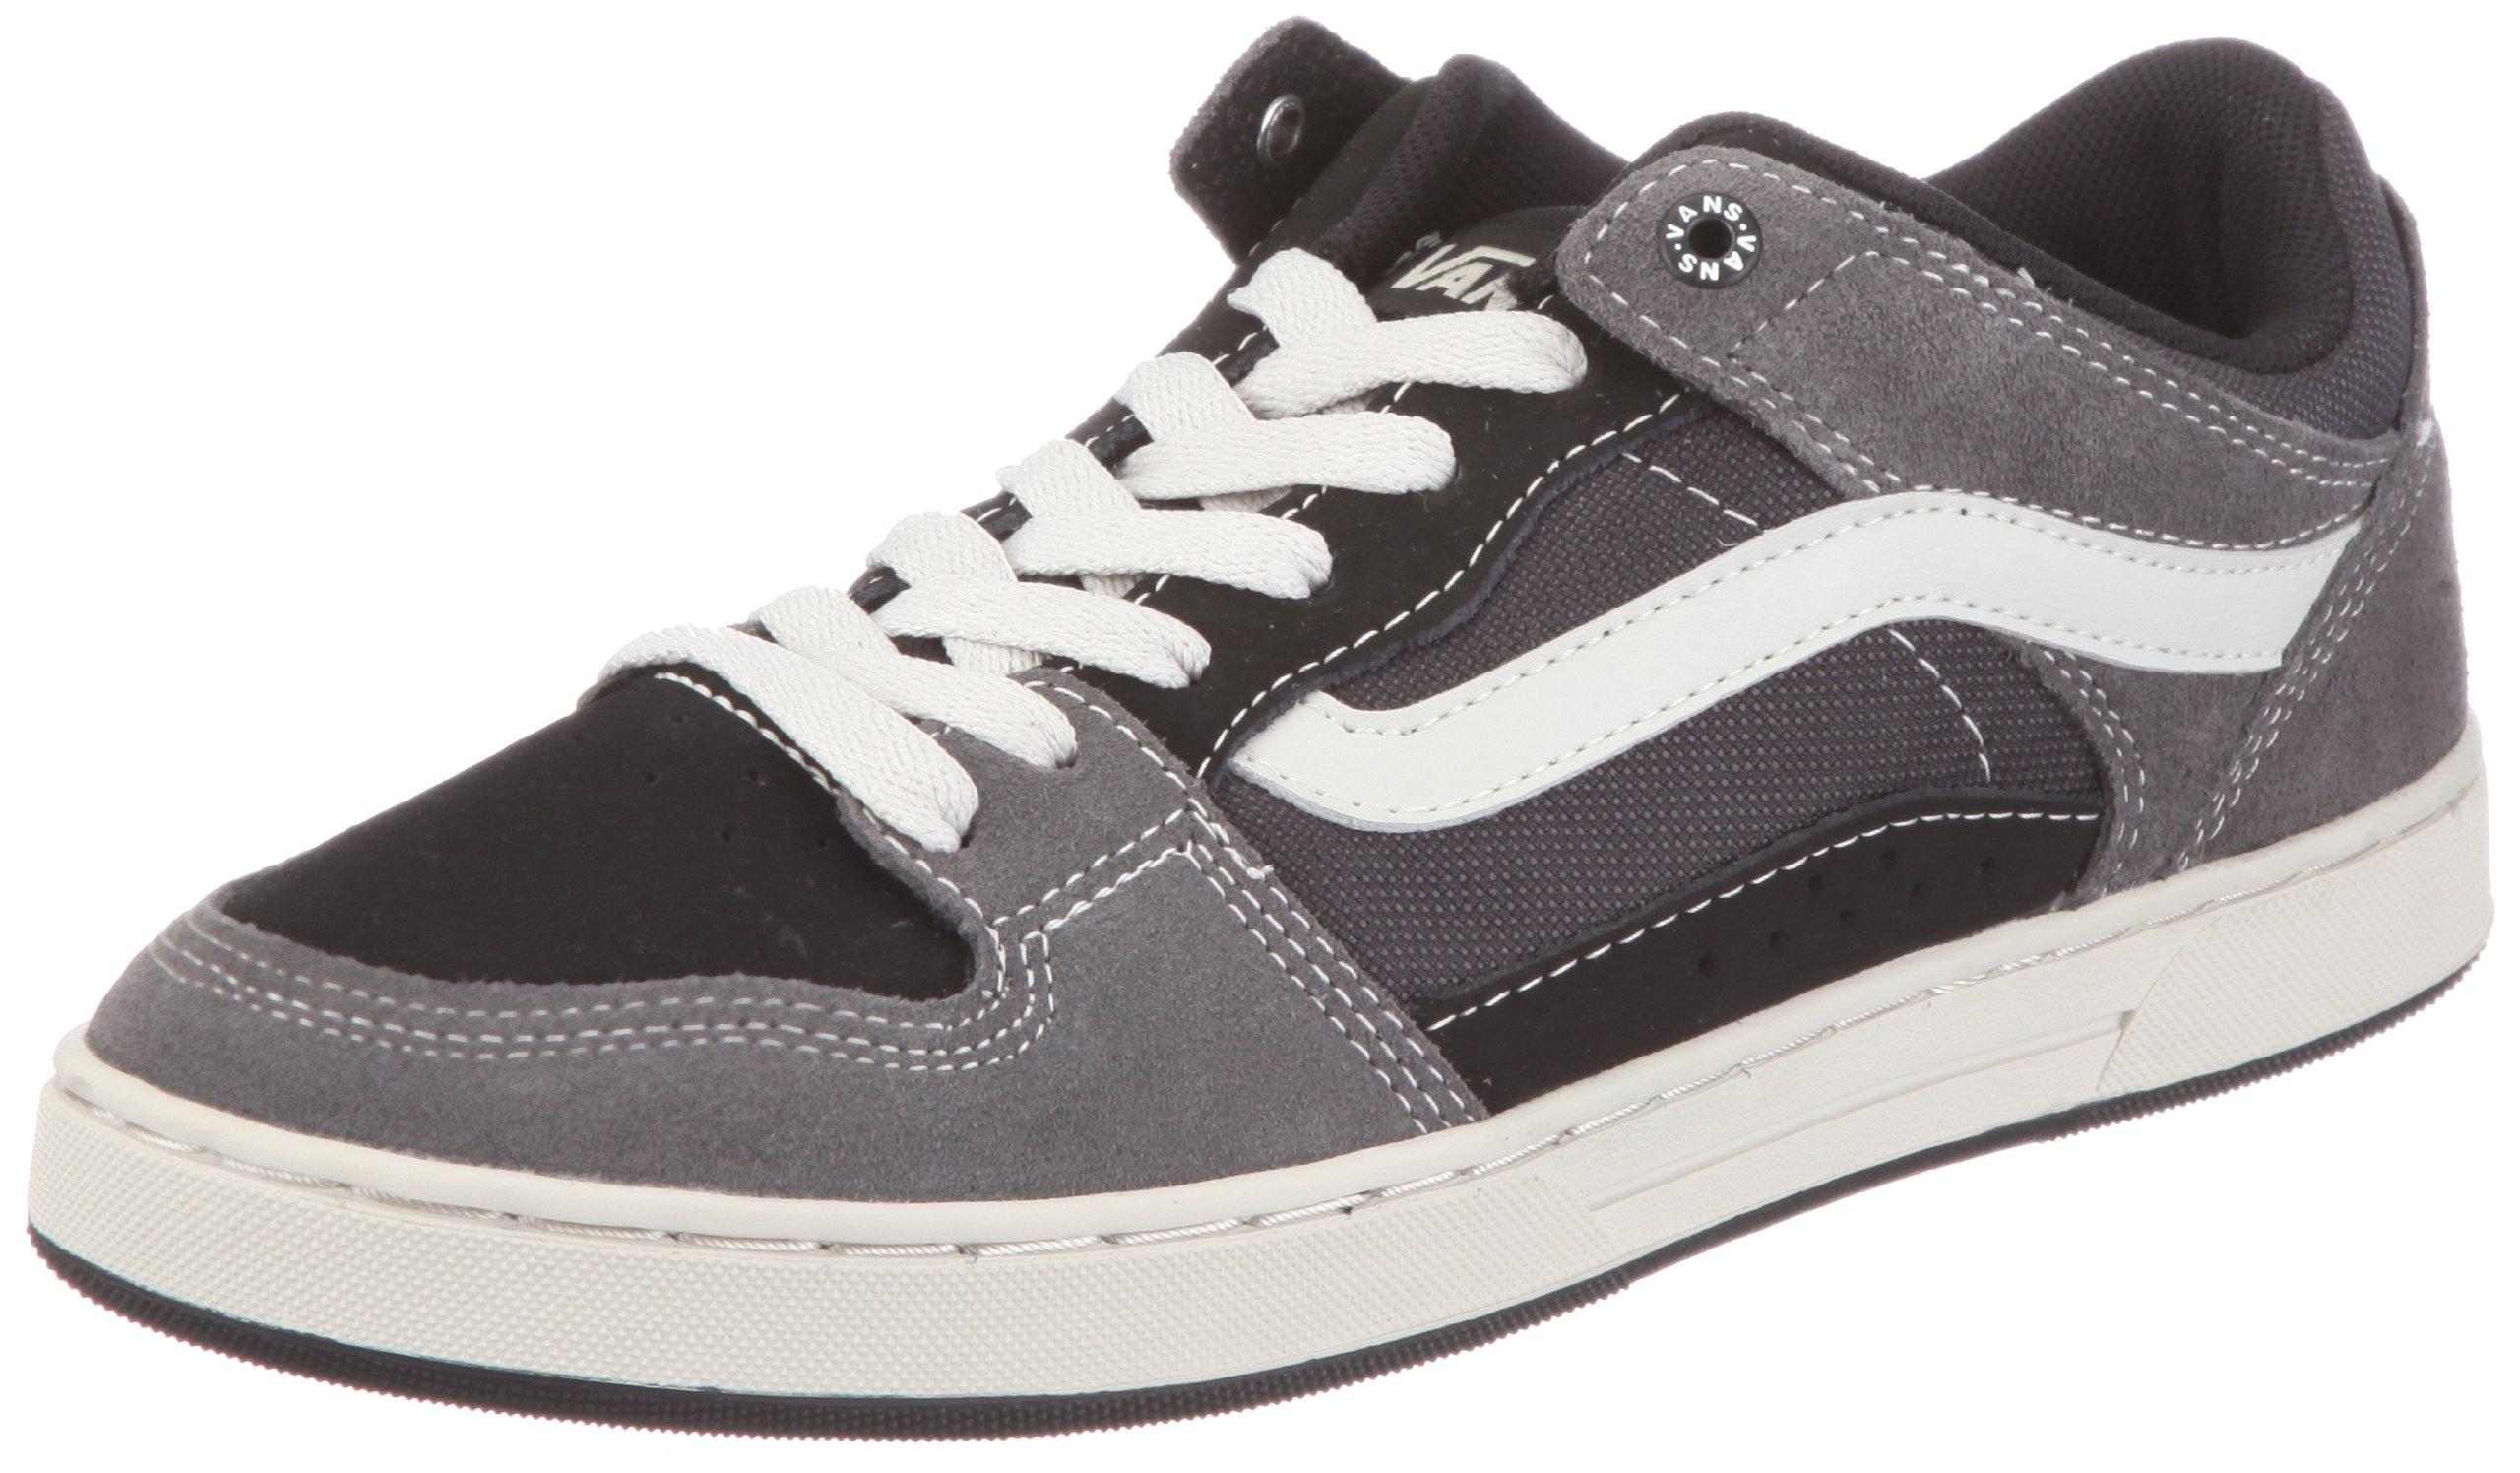 Vans Baxter, Low-top Trainers in Charcoal Black (Grey) for Men - Lyst